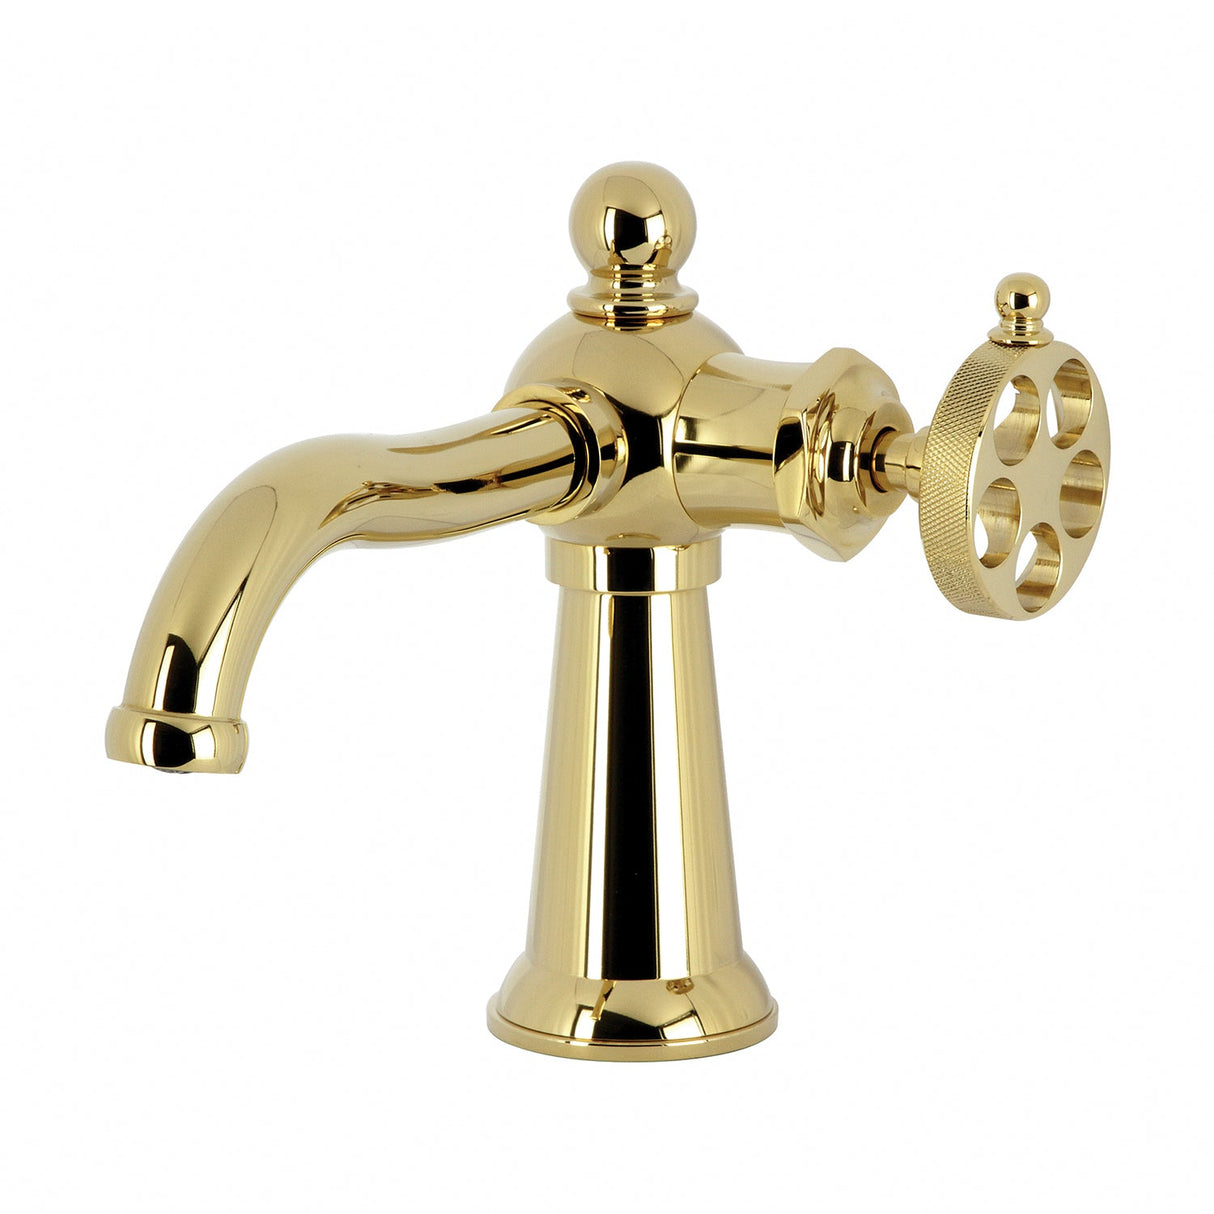 Wendell KS3542RKZ Single-Handle 1-Hole Deck Mount Bathroom Faucet with Knurled Handle and Push Pop-Up Drain, Polished Brass